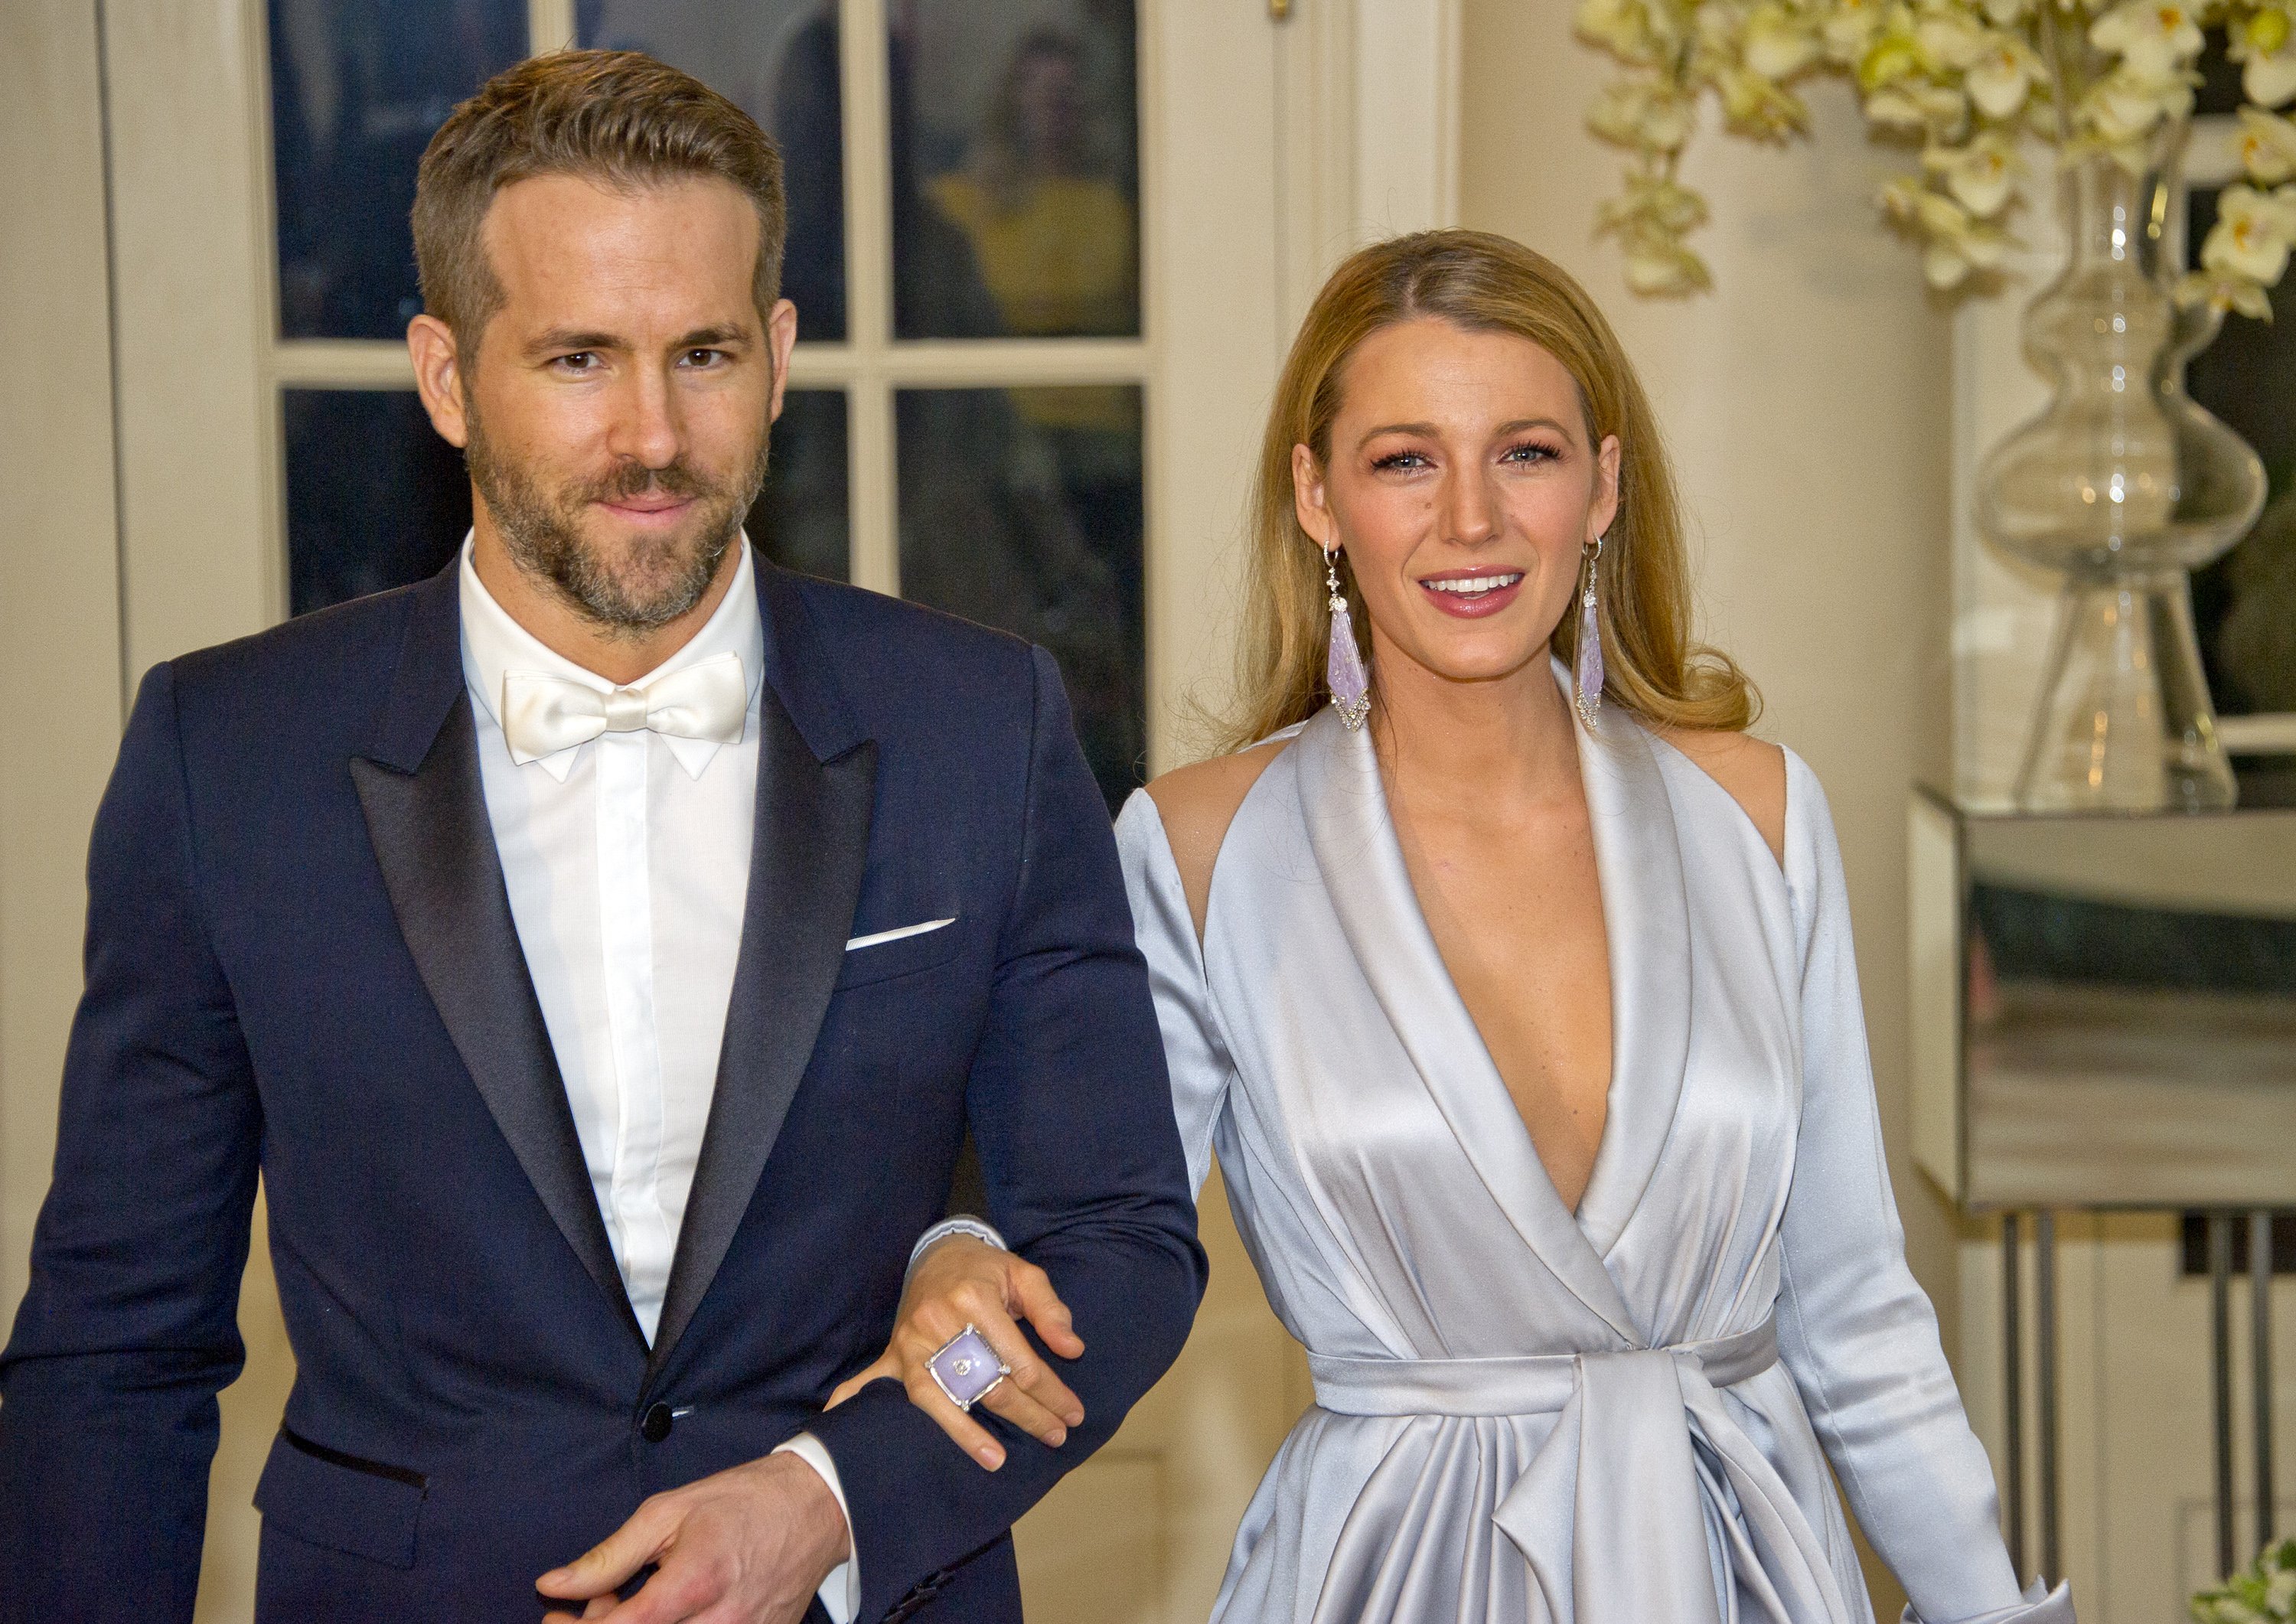 Ryan Reynolds and Blake Lively arrive for the State Dinner at the White House on March 10, 2016. | Photo: Getty Images